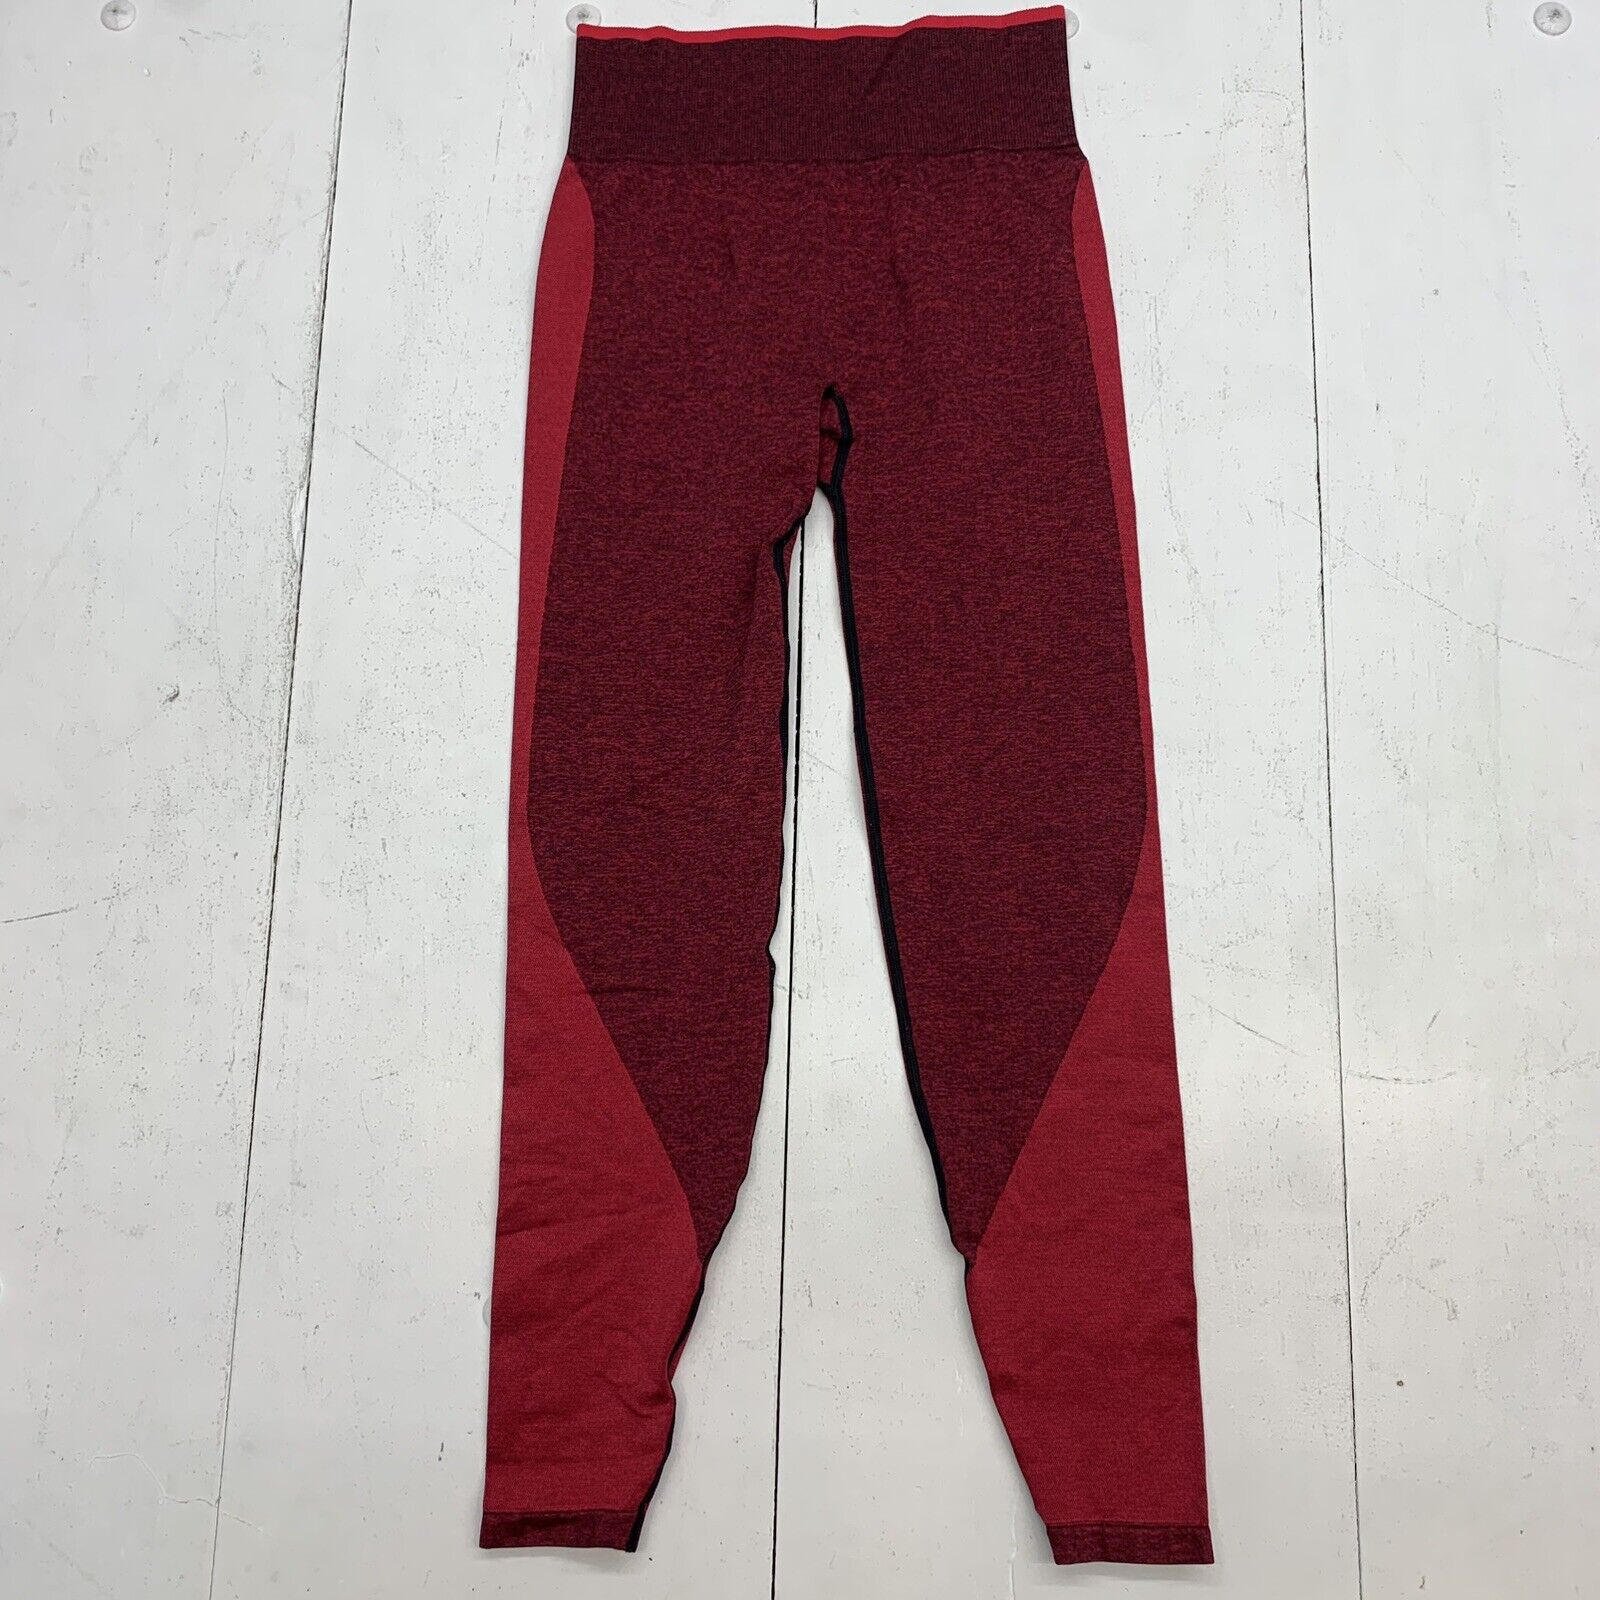 pink victoria secret womens red leggings size small - beyond exchange